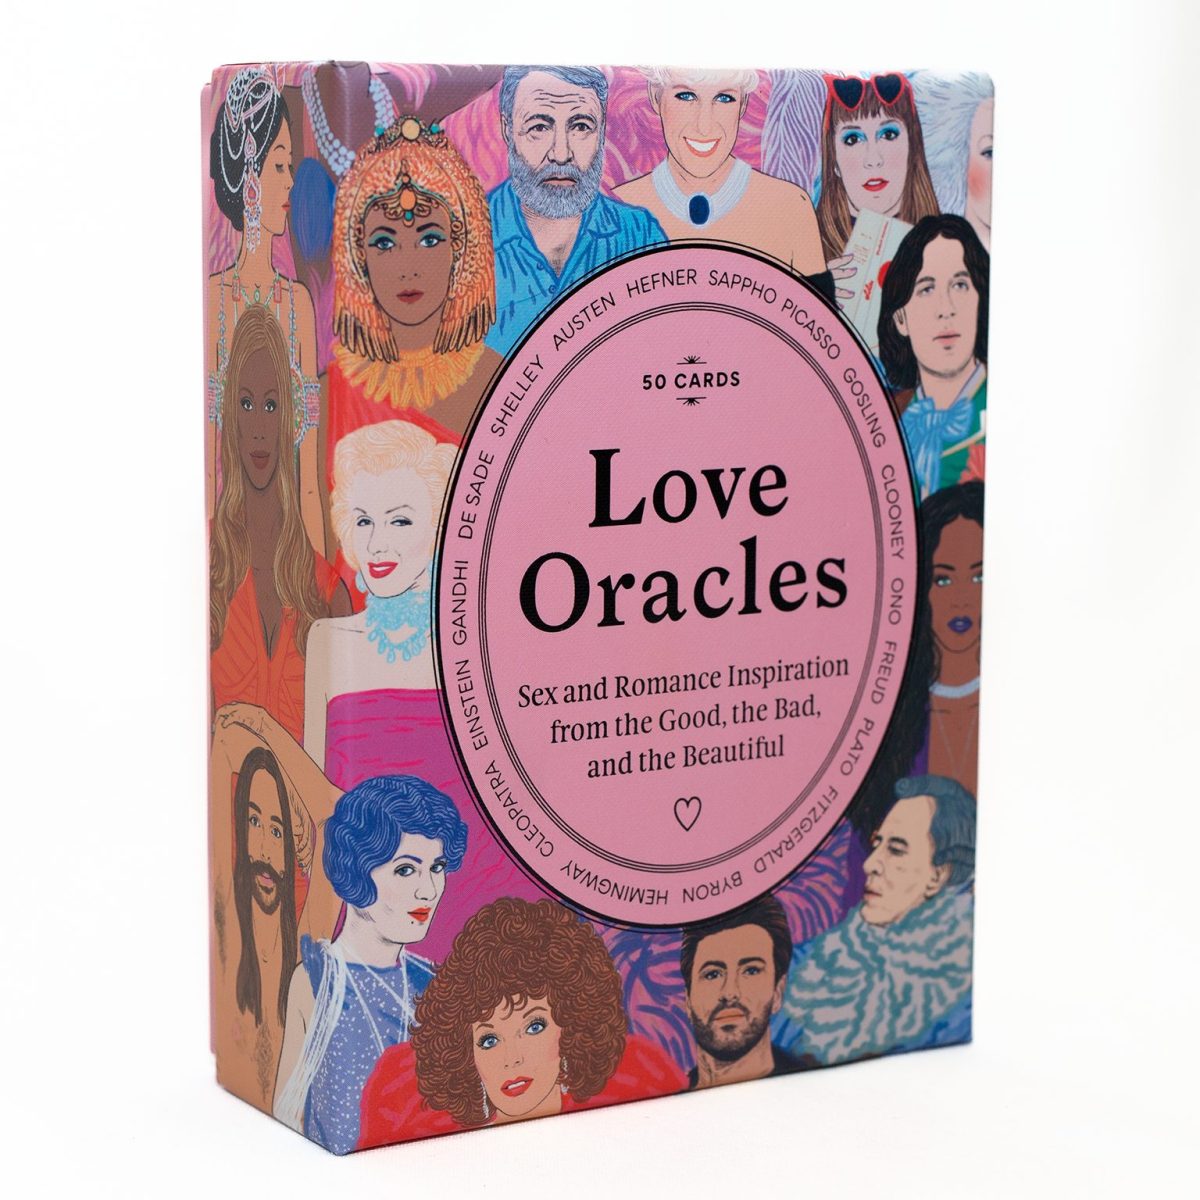 Love Oracles game box with pink circular centre and cartoon faces